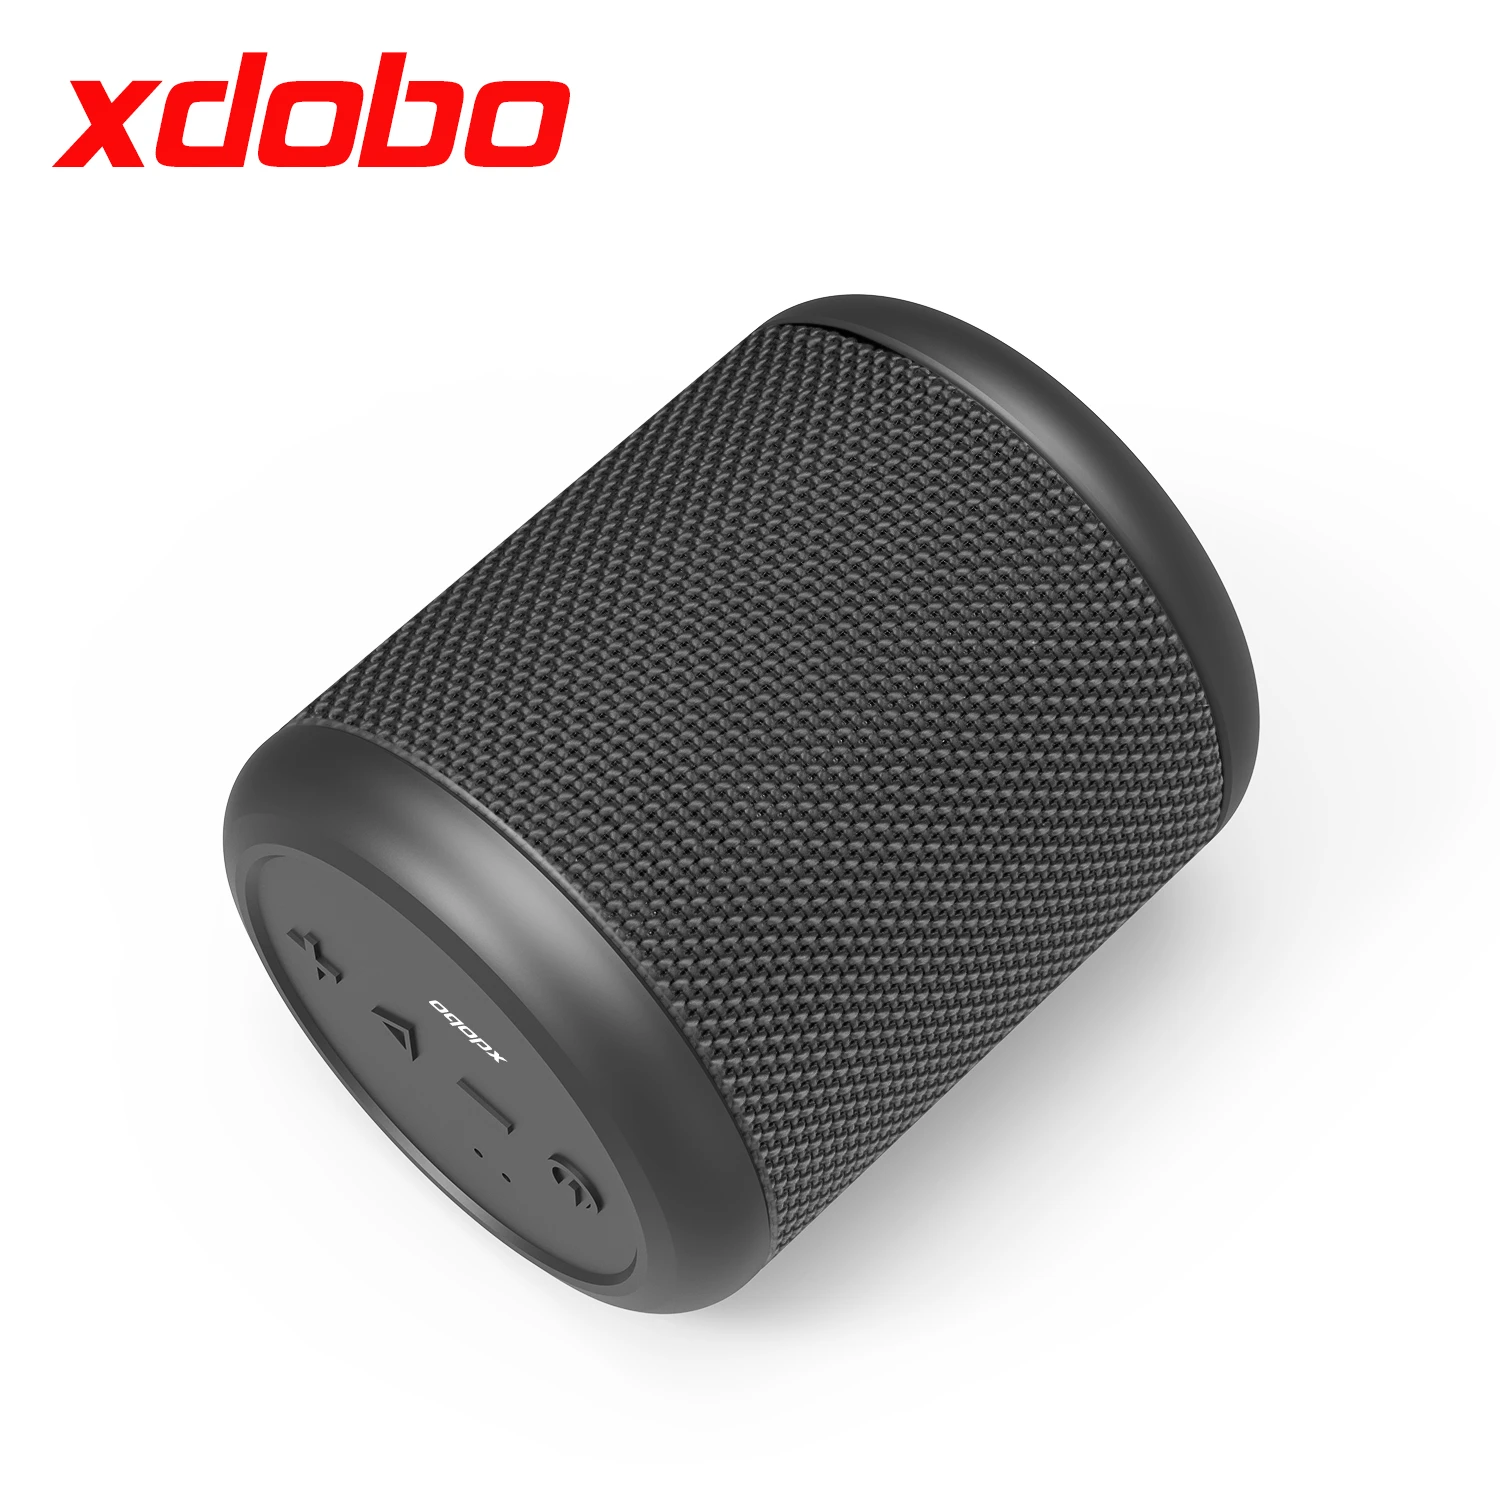 2021 Trending Products 15W Bluetooths Speaker With Subwoofer Wireless